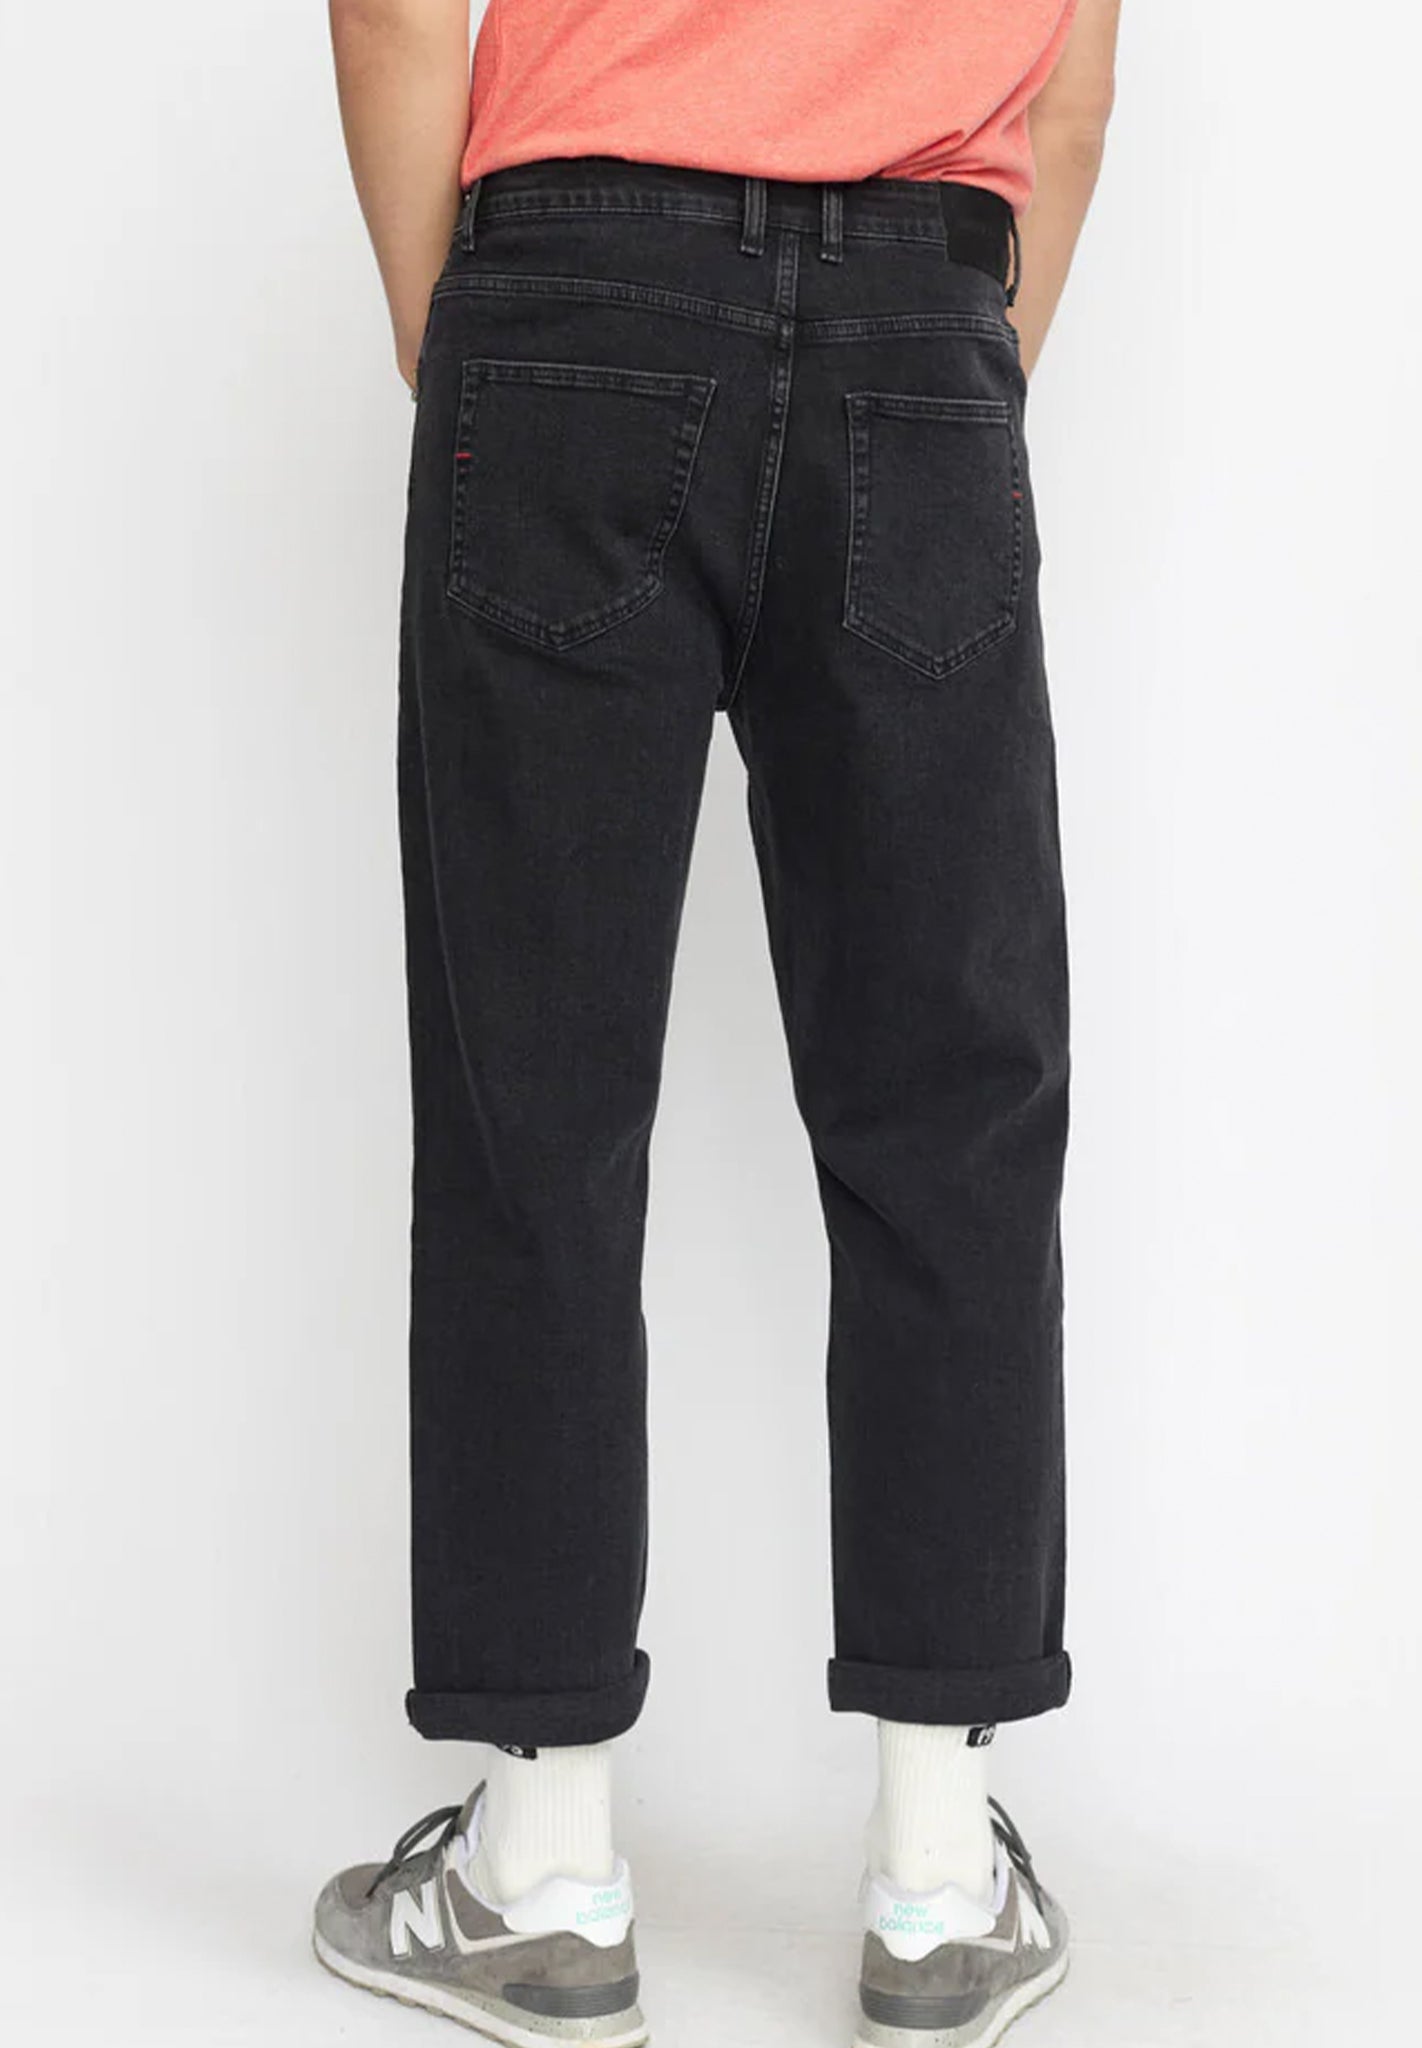 REVOLUTION - 5372 Relaxed Fit Jeans - BACKYARD